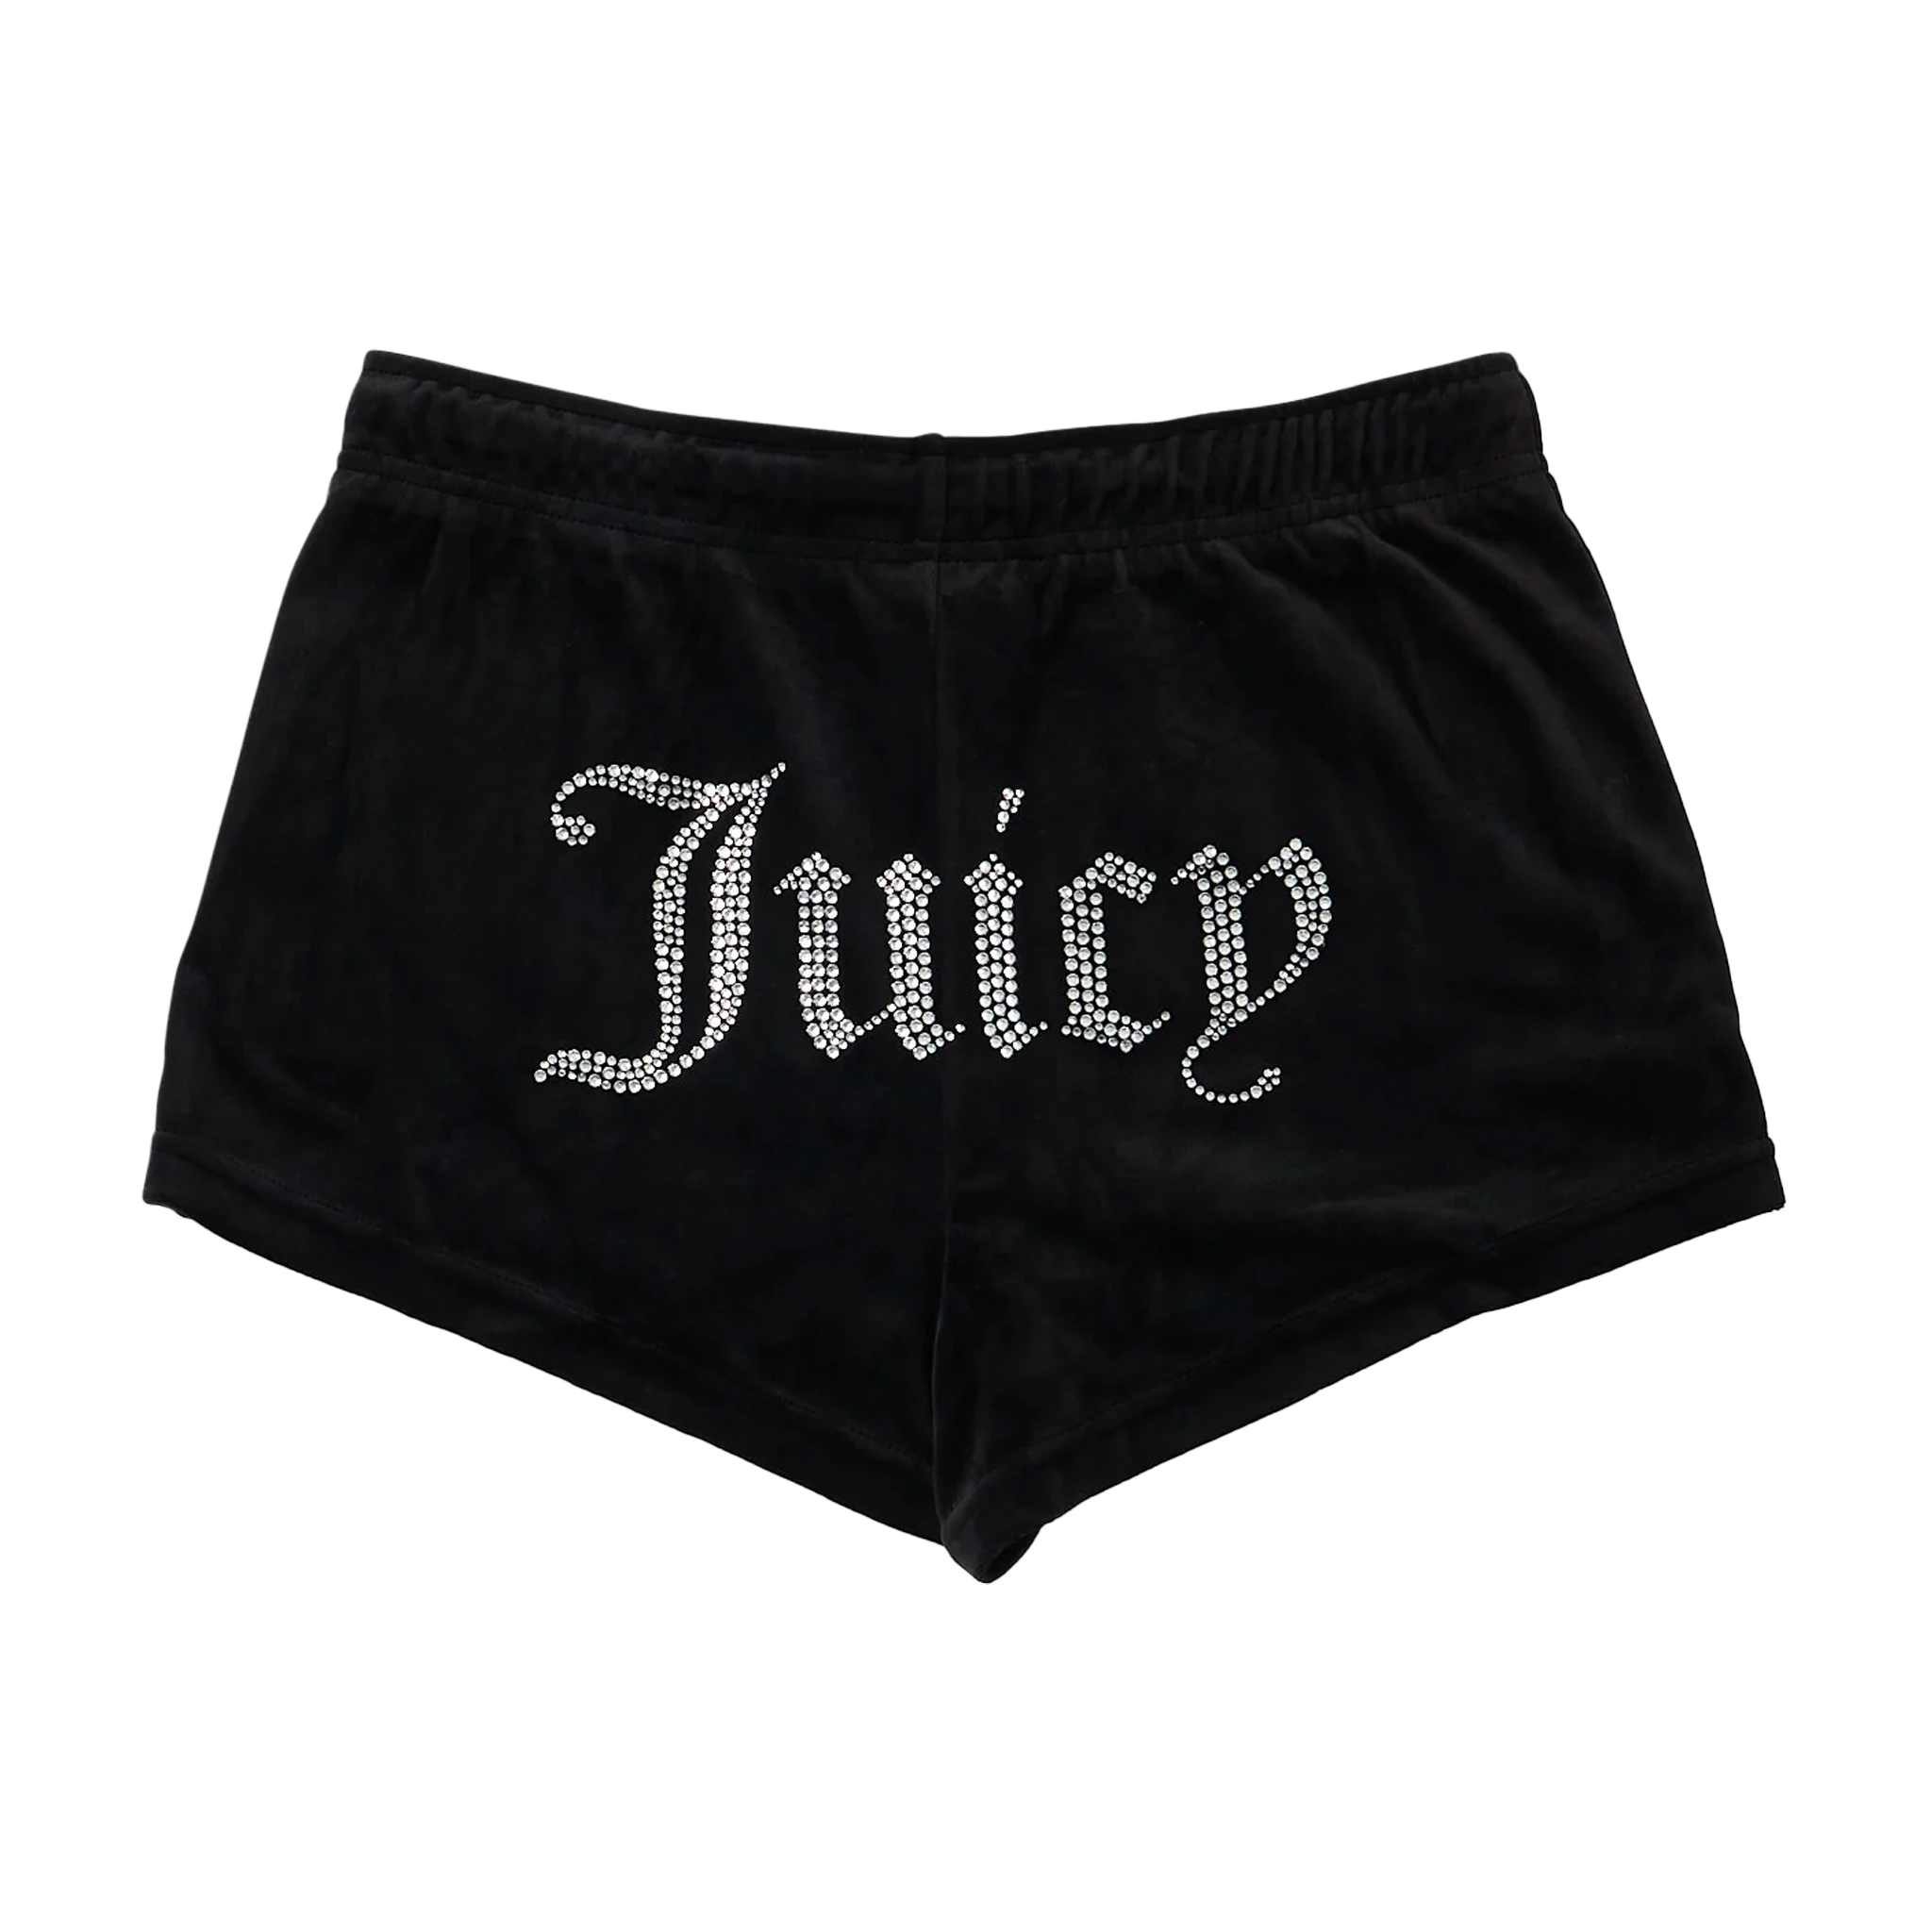 Juicy Couture Boxer Shorts